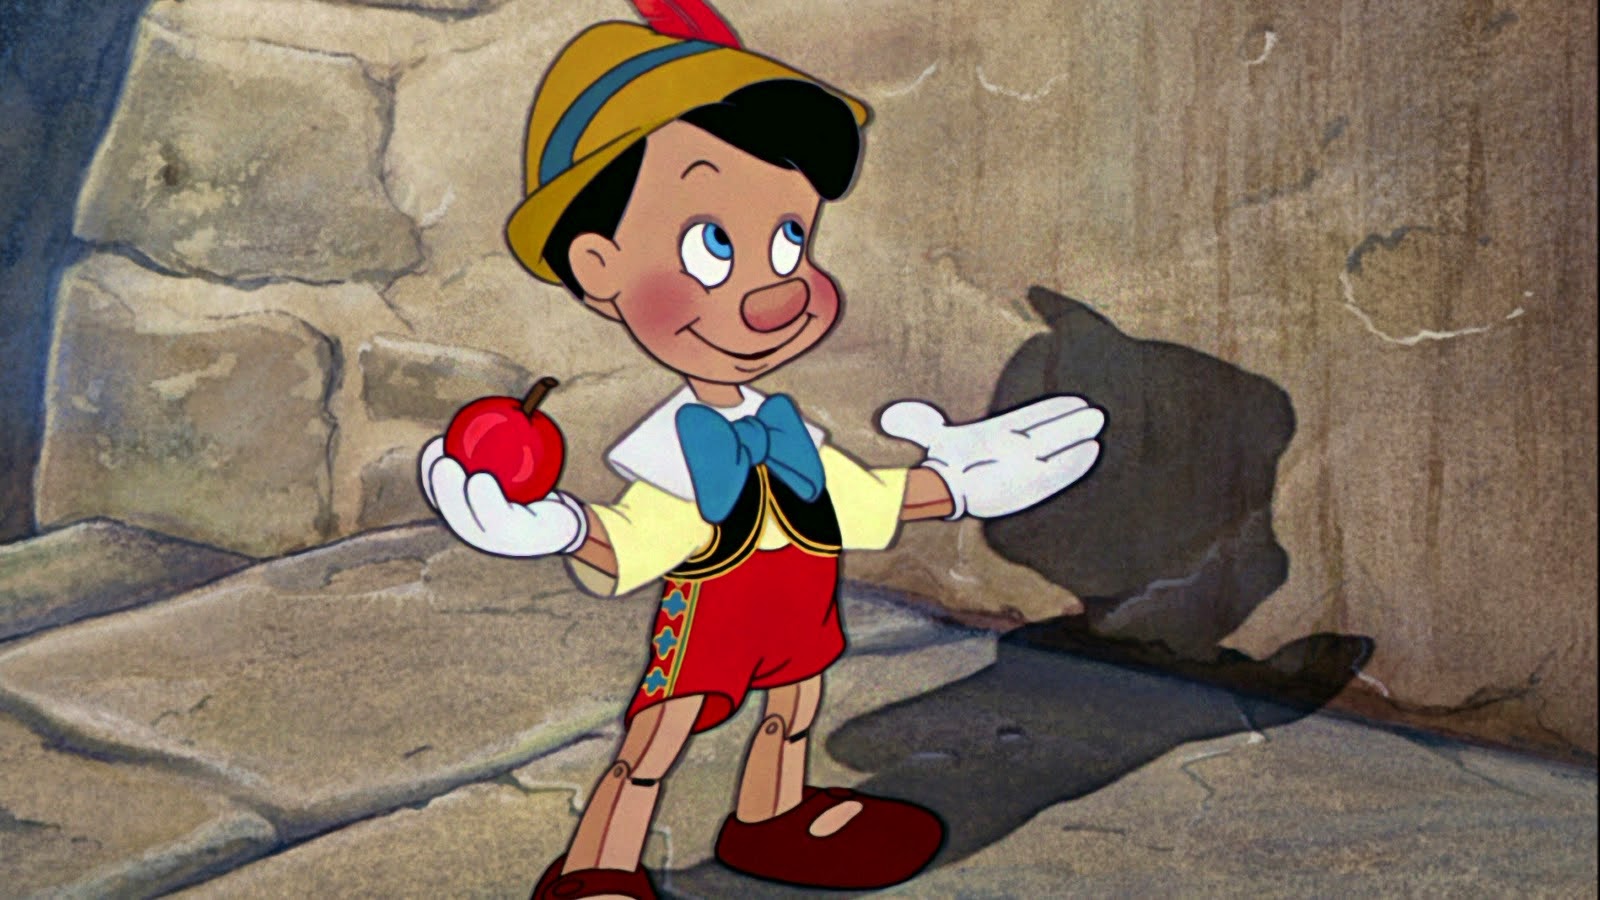 Disney will be bringing the 1940‘s animated classic Pinocchio back to the b...